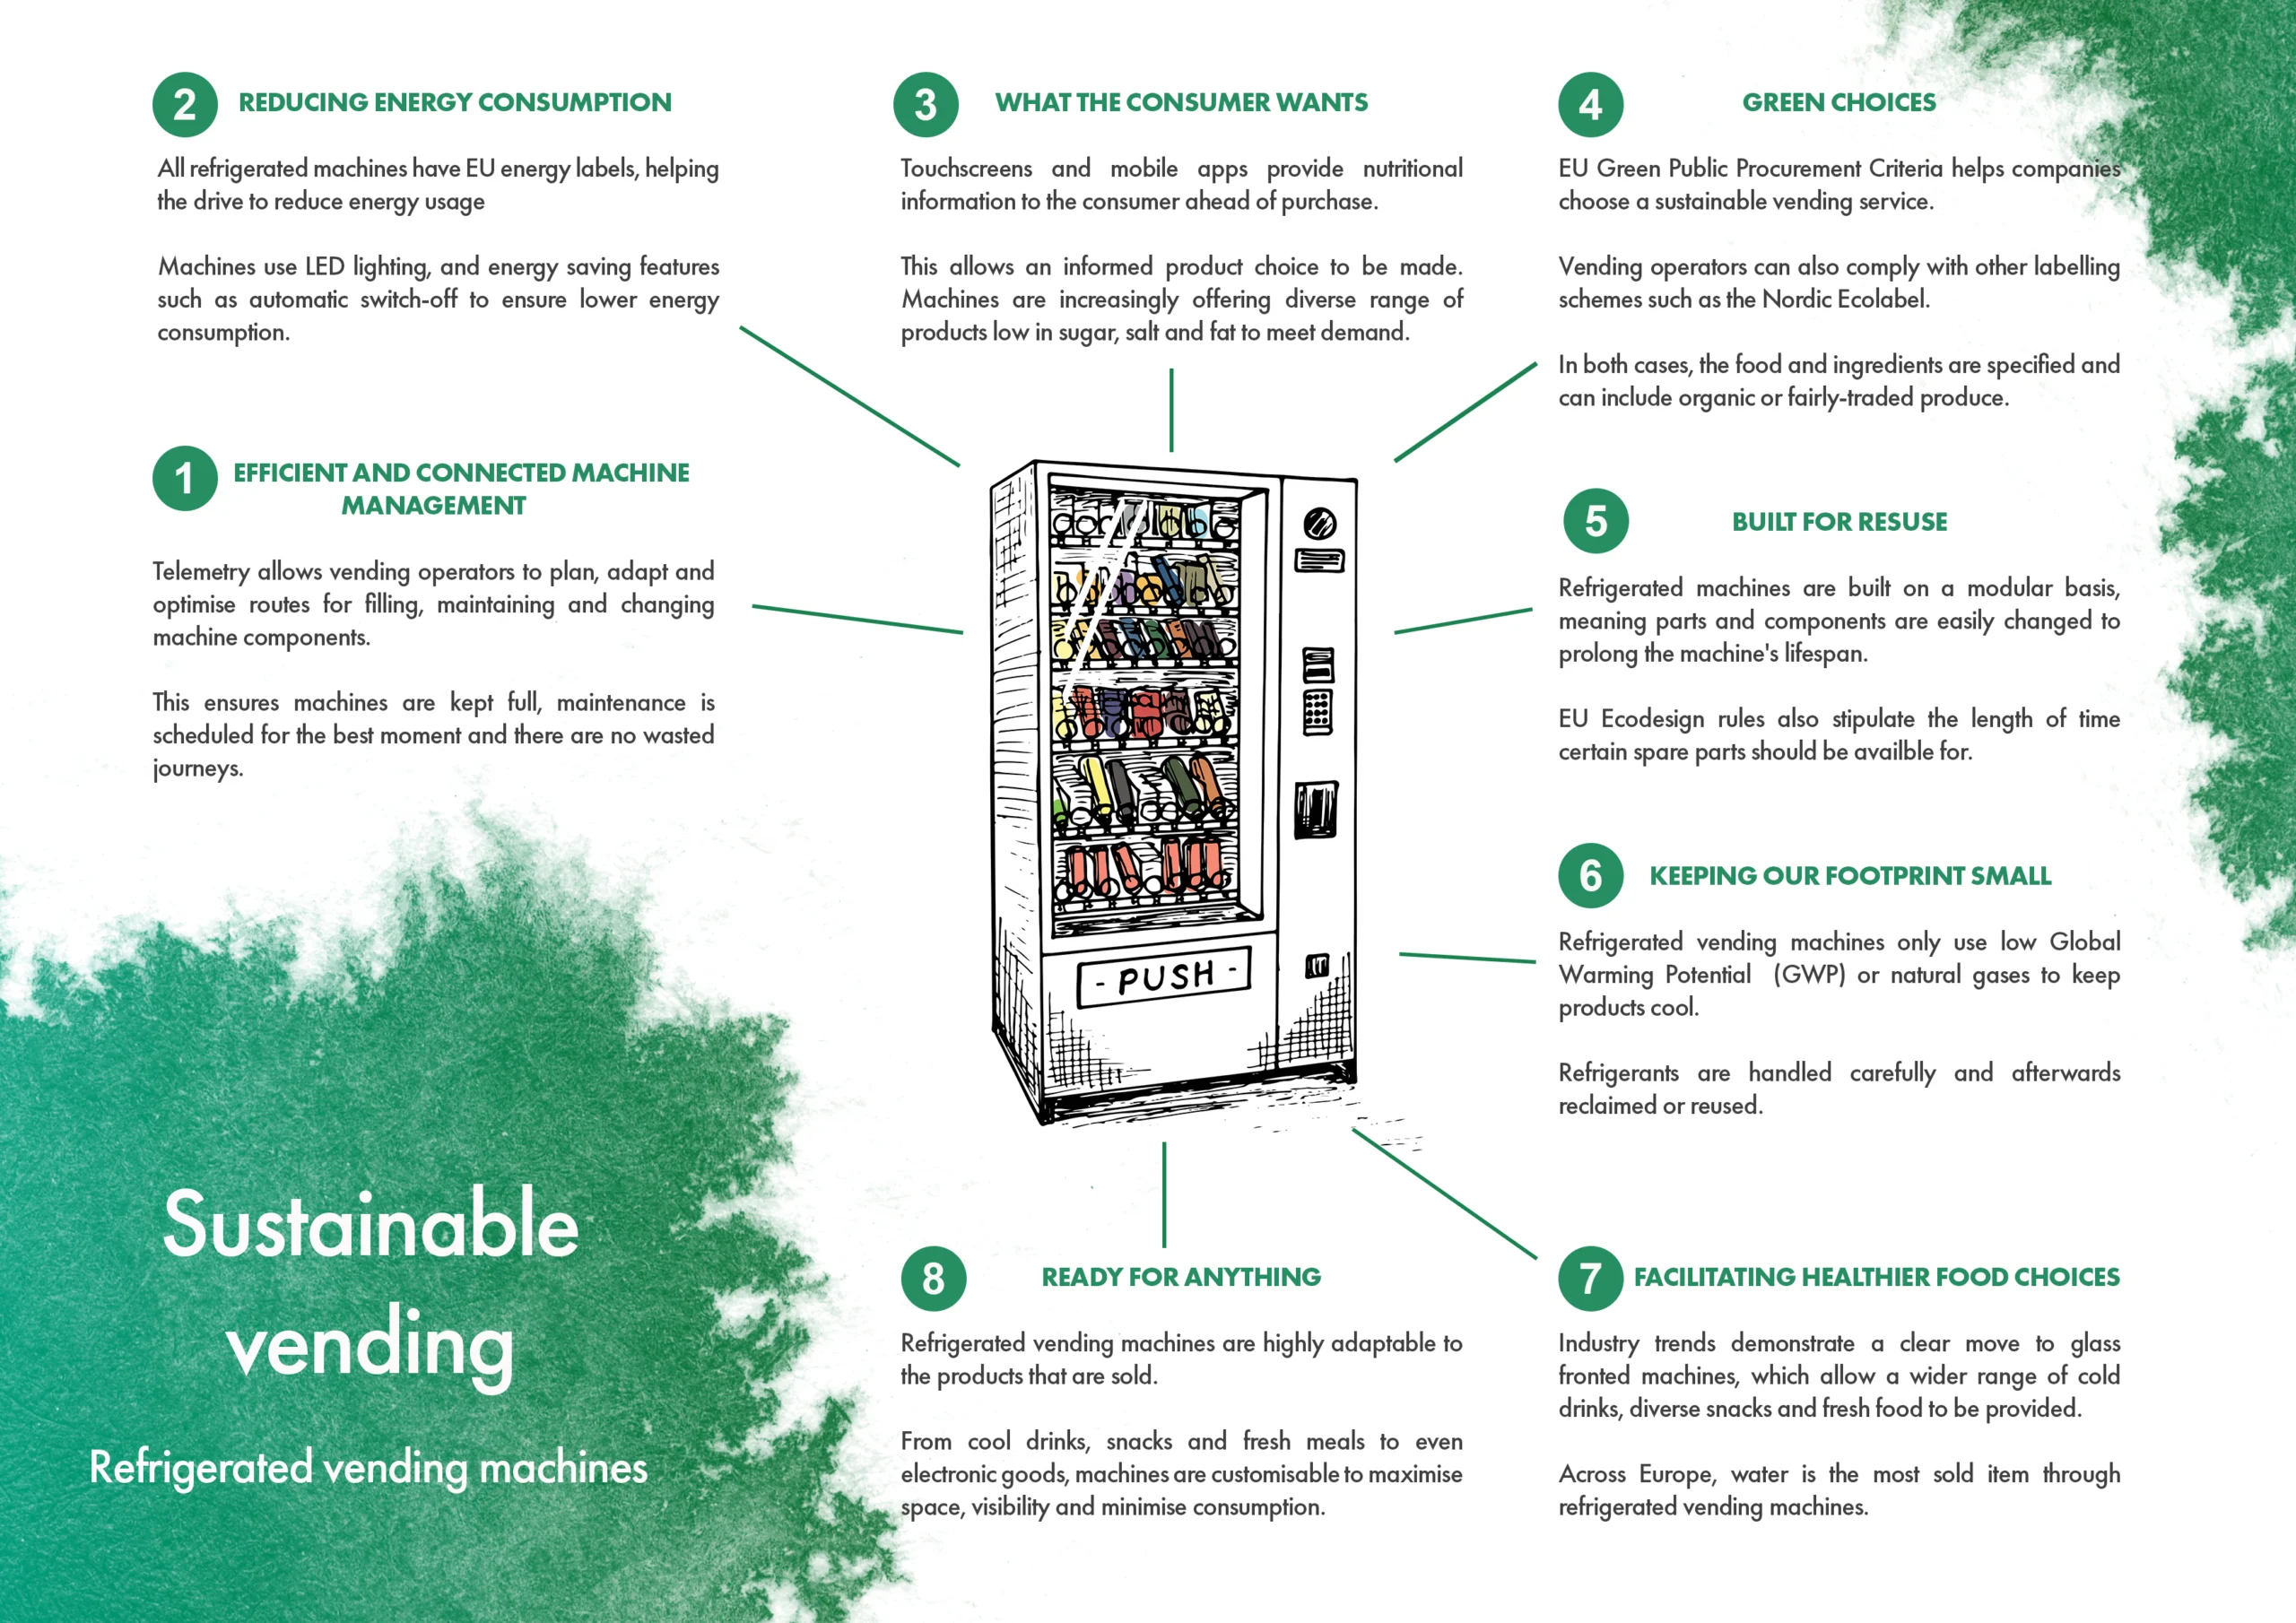 Move towards Sustainable Vending